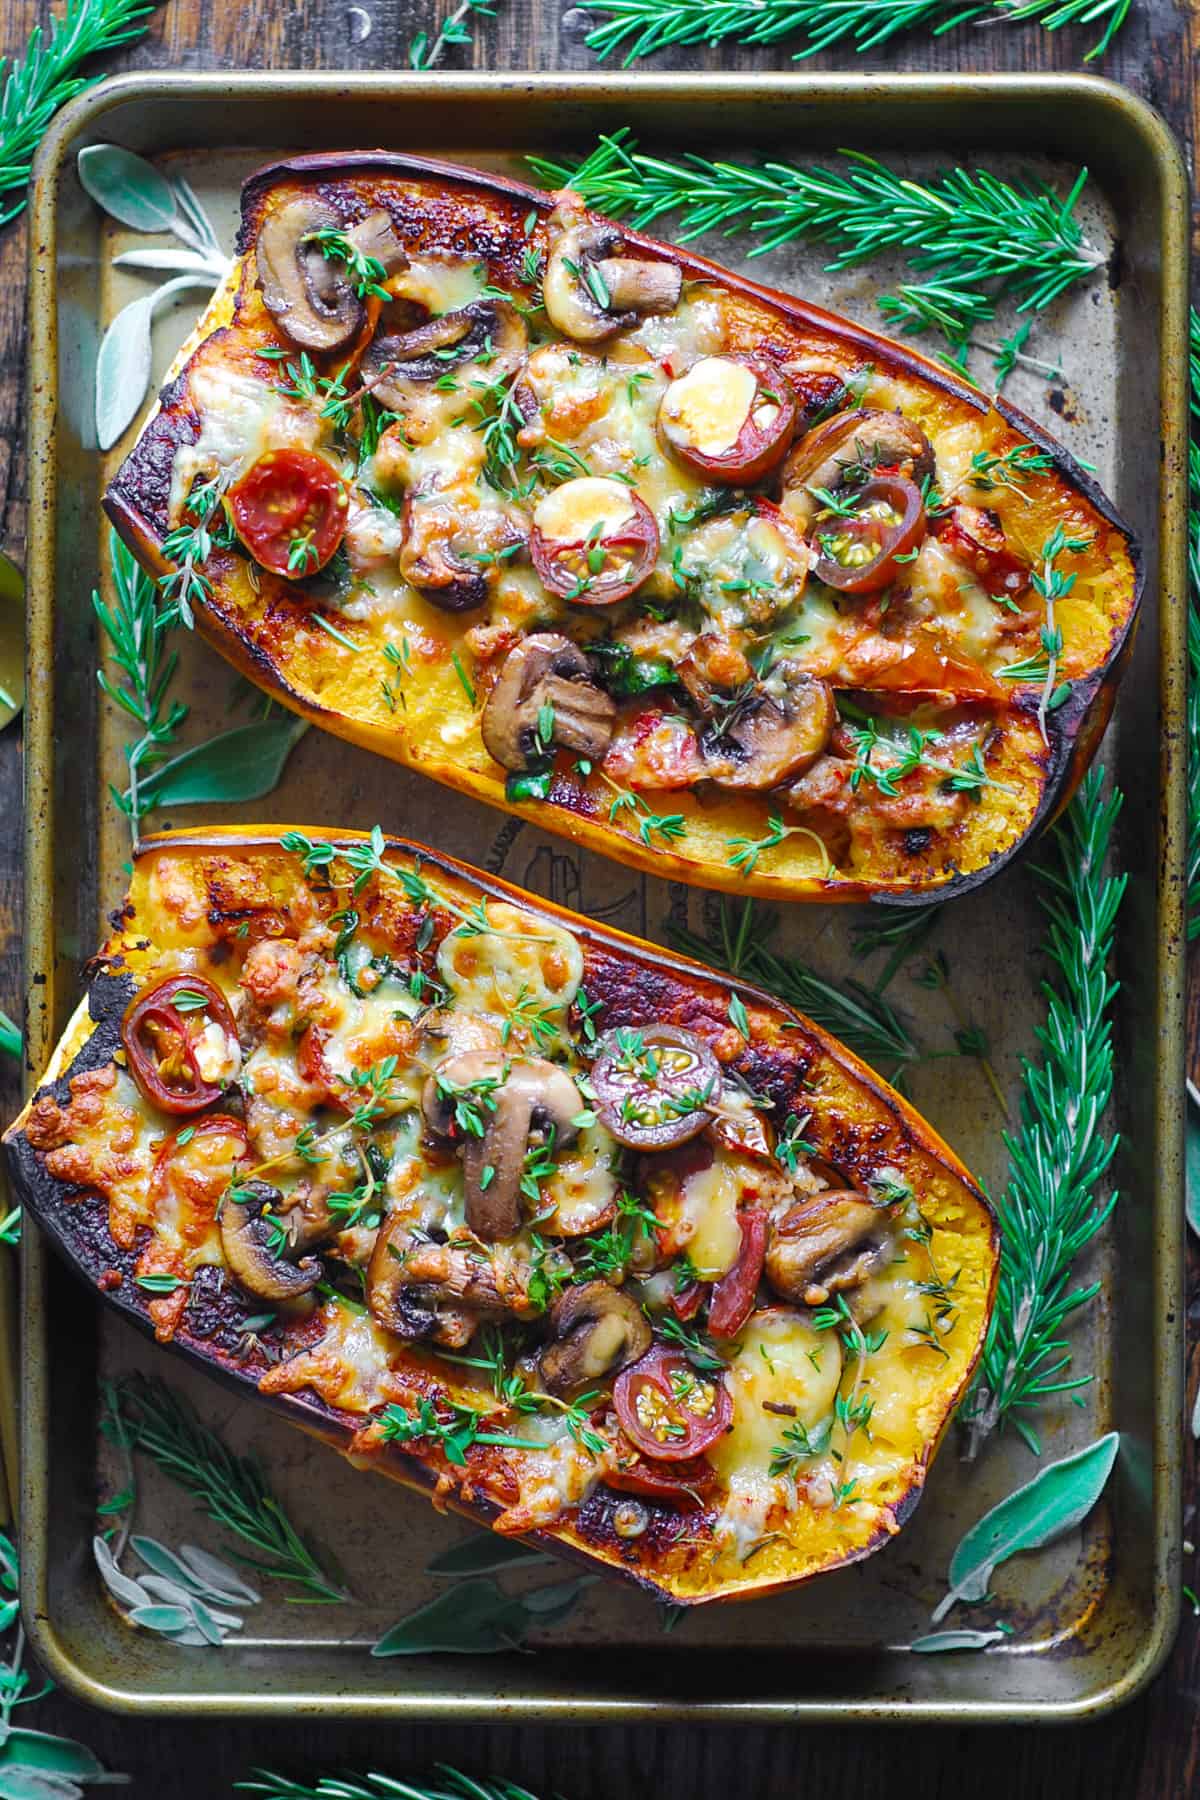 Sausage Stuffed Spaghetti Squash with Spinach, Tomatoes, Mushrooms, and Parmesan